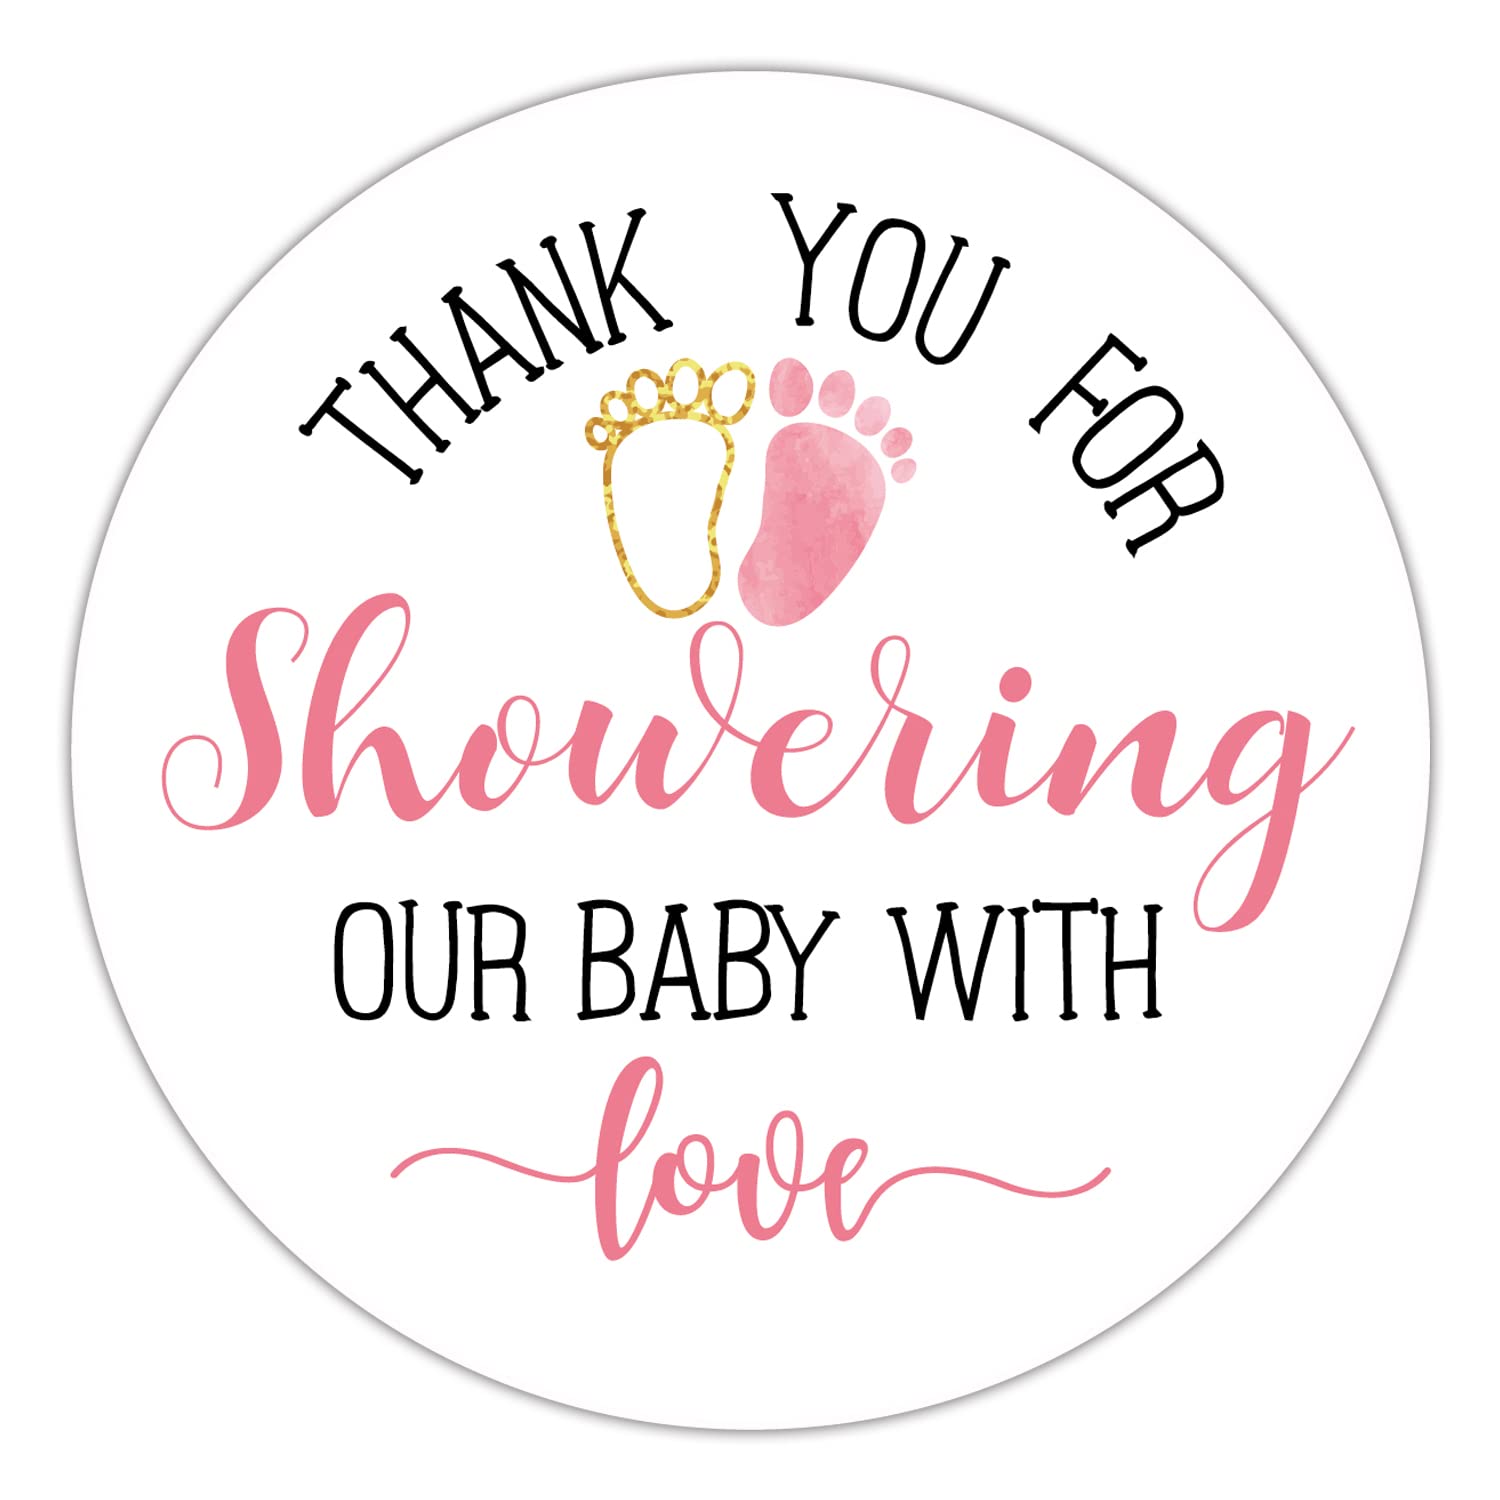 Pink Baby Shower Stickers, Thank You for Showering Our Baby with Love Stickers, Baby Shower Favors for Girls, Thank You Stickers Baby Shower, 2 Inch, Pack of 50.